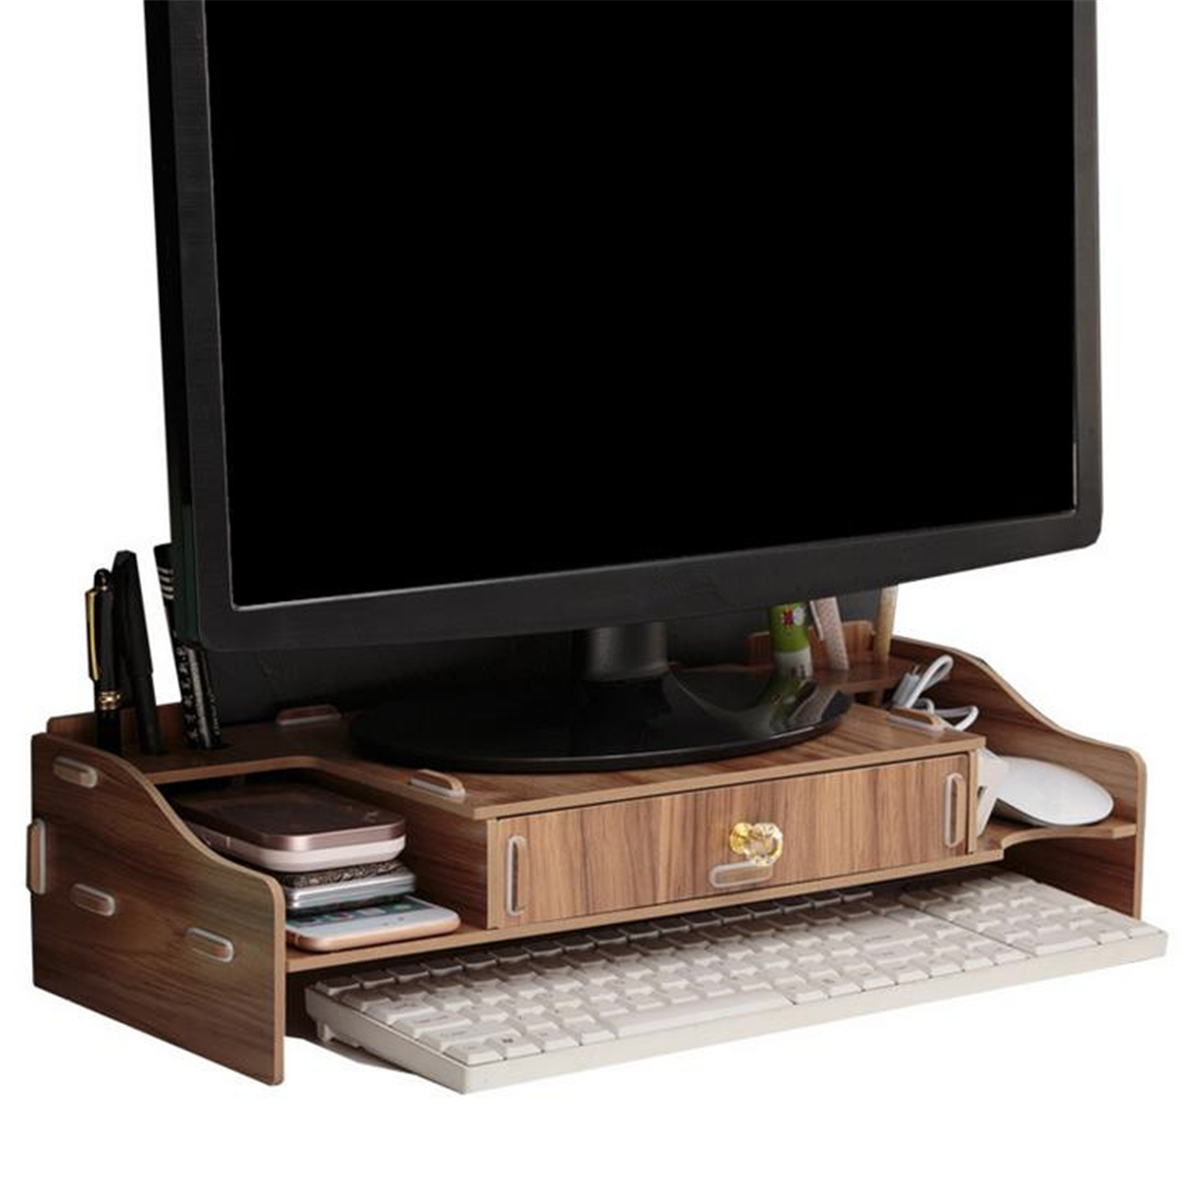 Find Desktop Computer Riser Stand TV LCD Screen Monitor Mount Display Desk Organizer Monitor Bracket for Sale on Gipsybee.com with cryptocurrencies